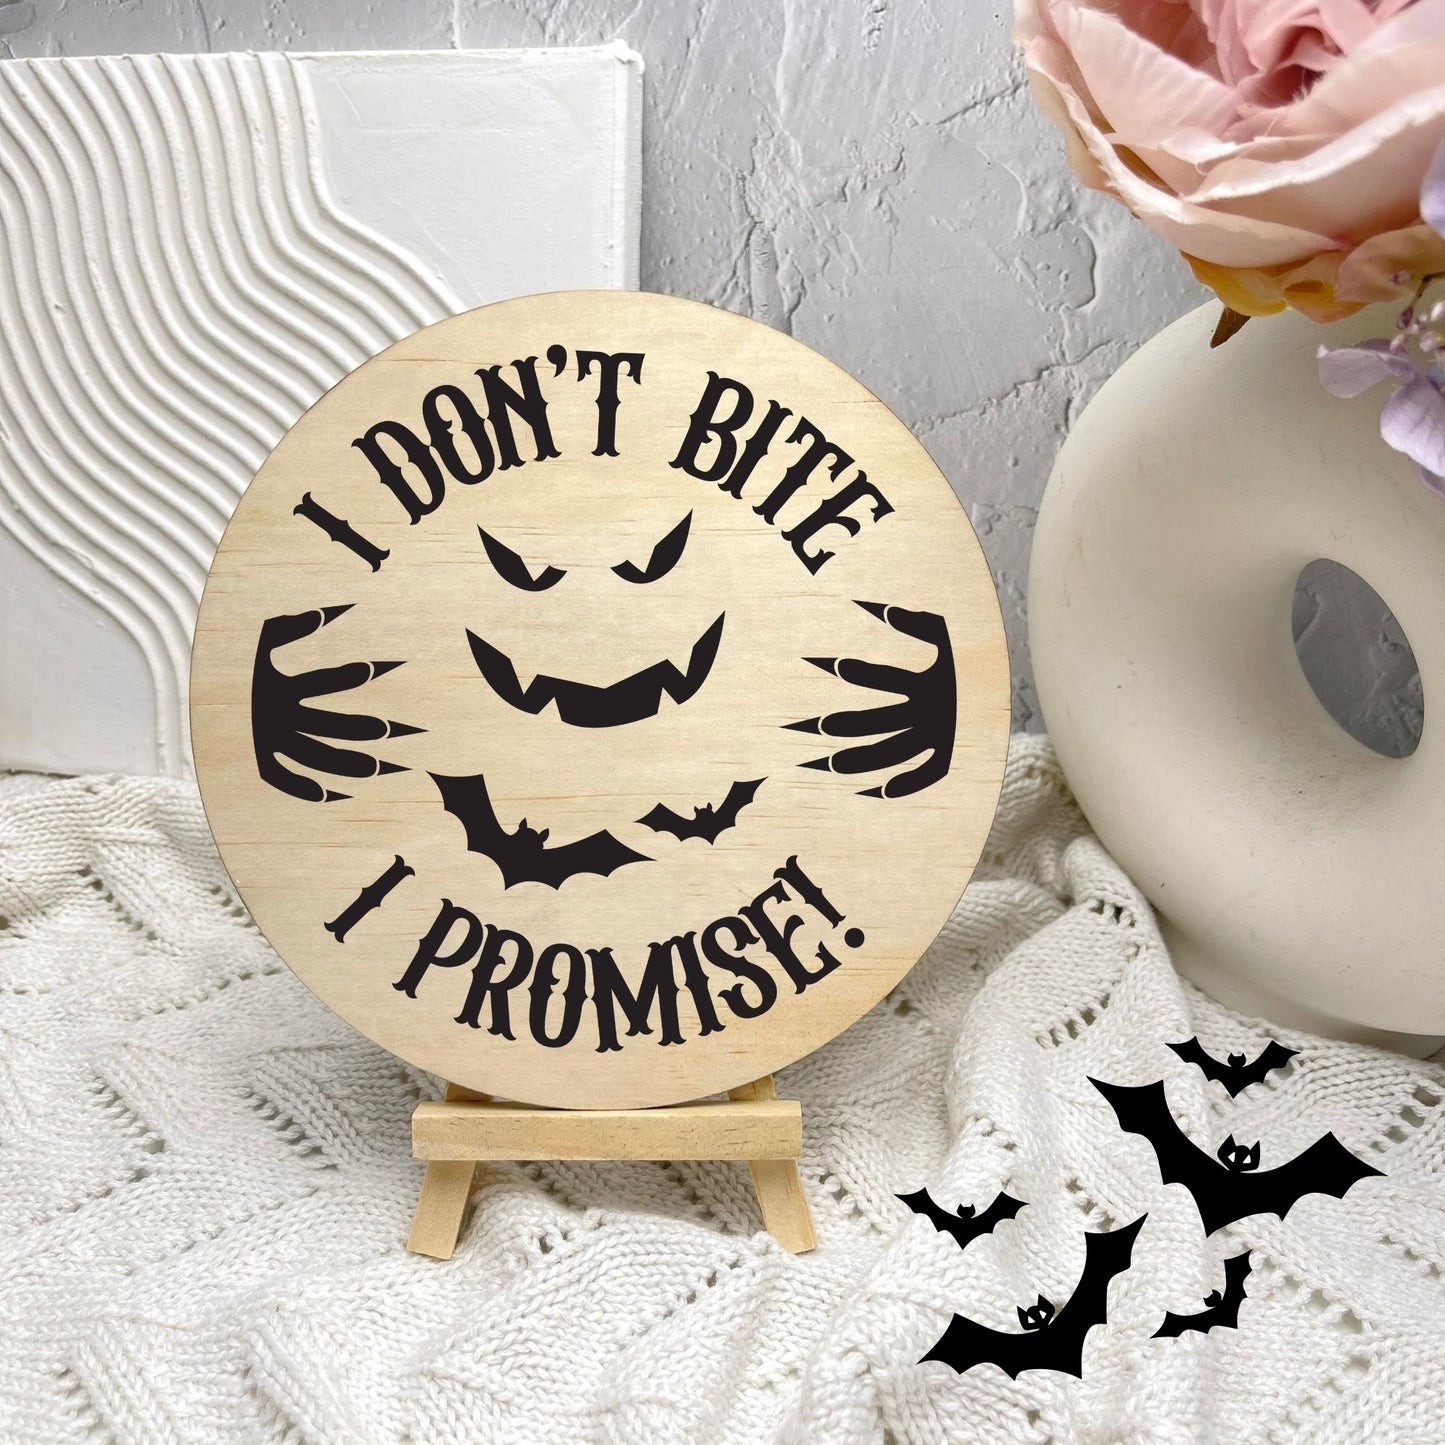 Don't bite I promise sign, Halloween Decor, Spooky Vibes, hocus pocus sign, trick or treat decor, haunted house h36